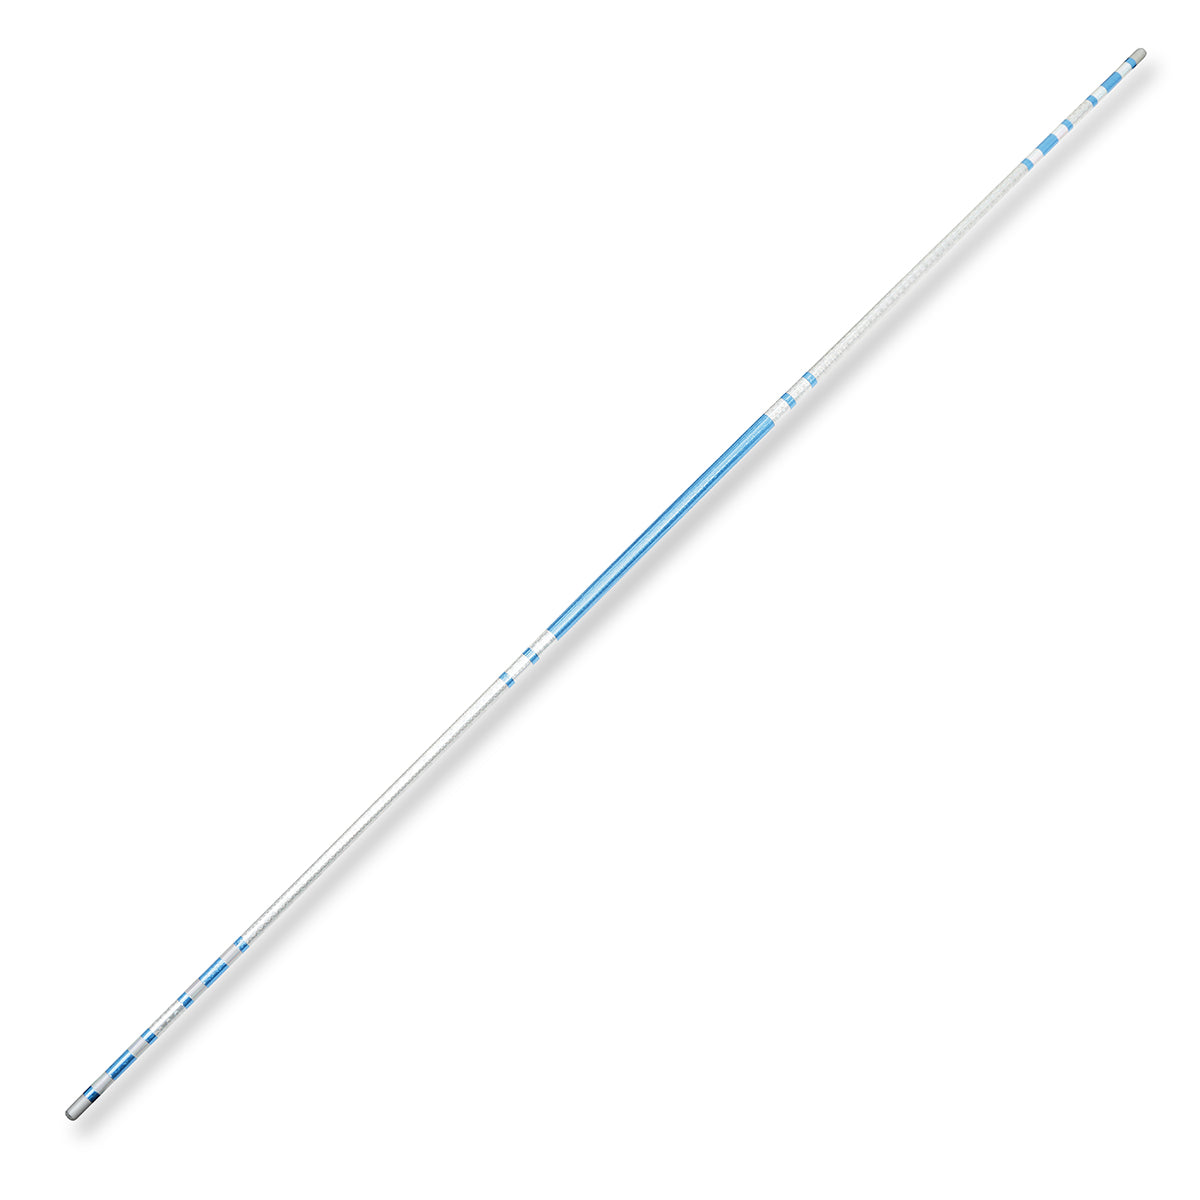 Chrome Competition Silver/Blue Lotus Wood Bo Staff - 60" Inches